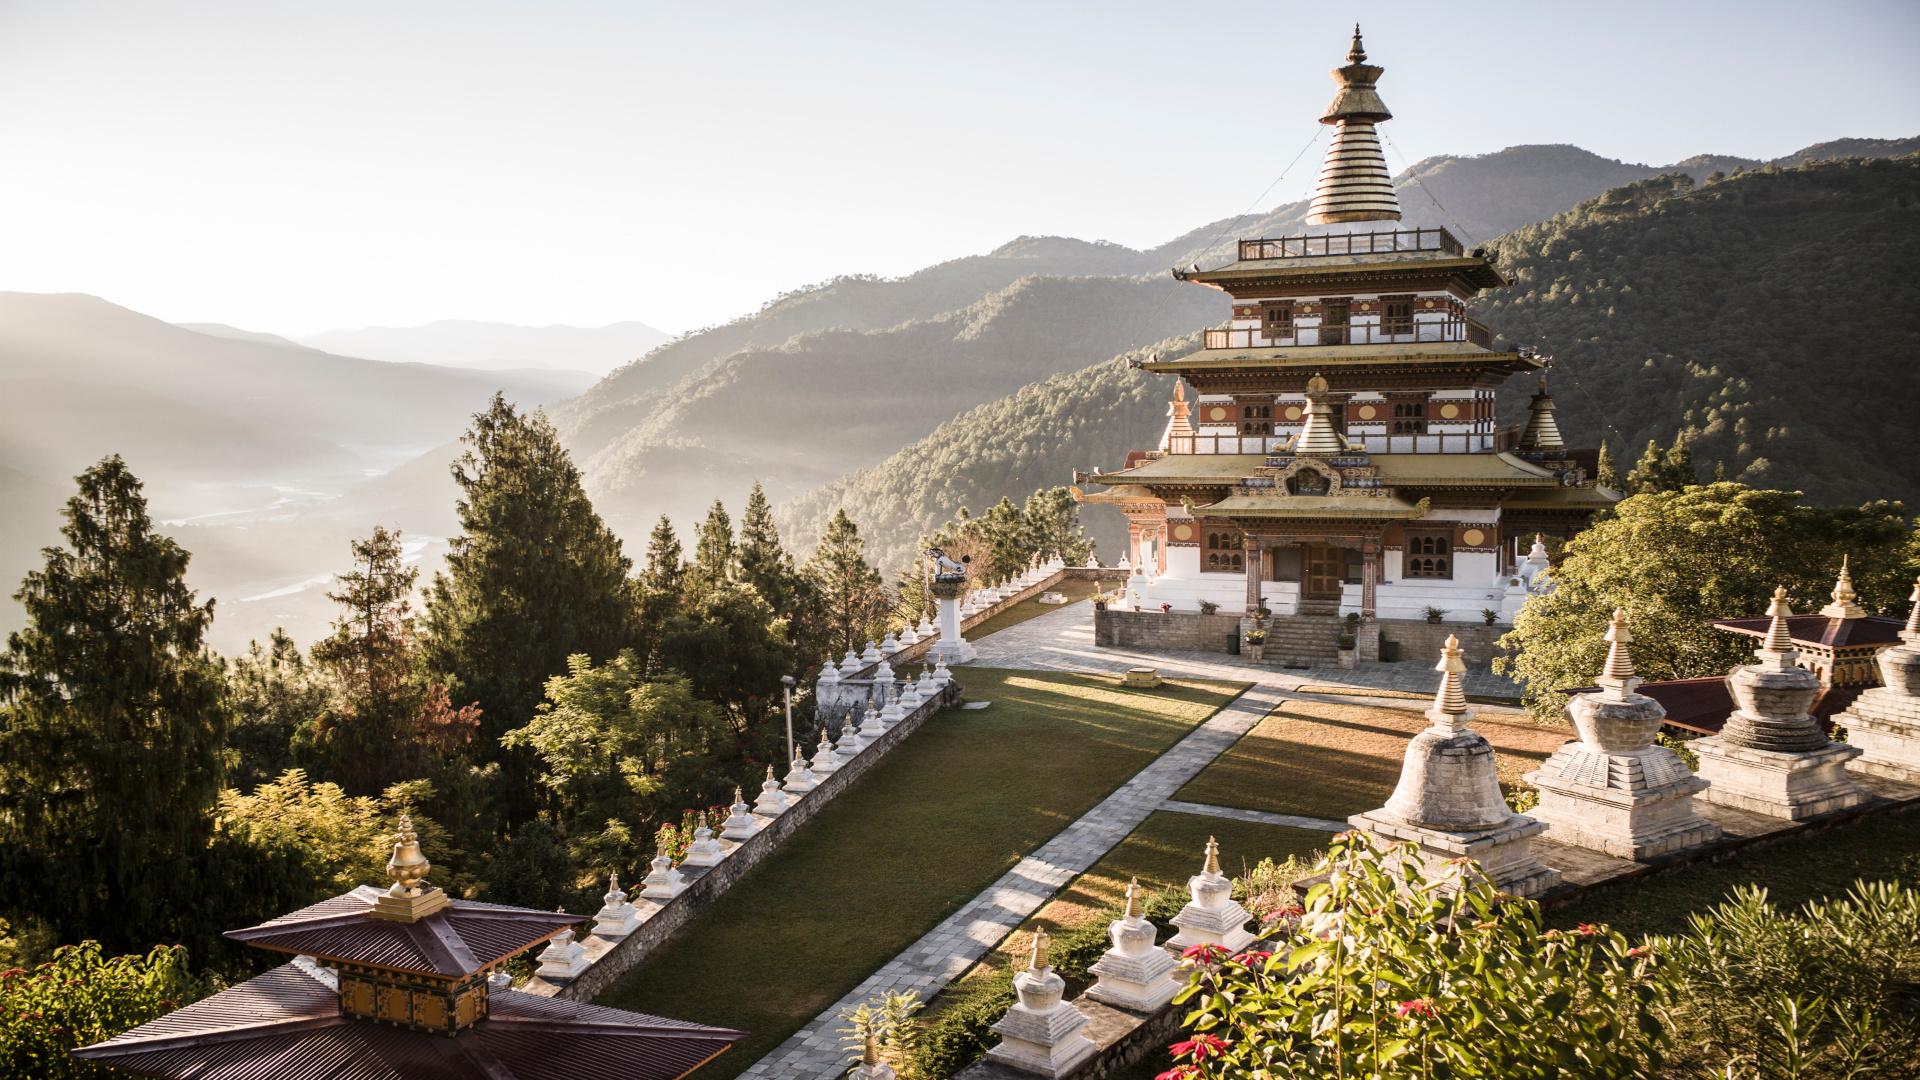 Explore Bhutan with Berner Travel, Expert guides, Customized itineraries, Tailored experiences, 1920x1080 Full HD Desktop